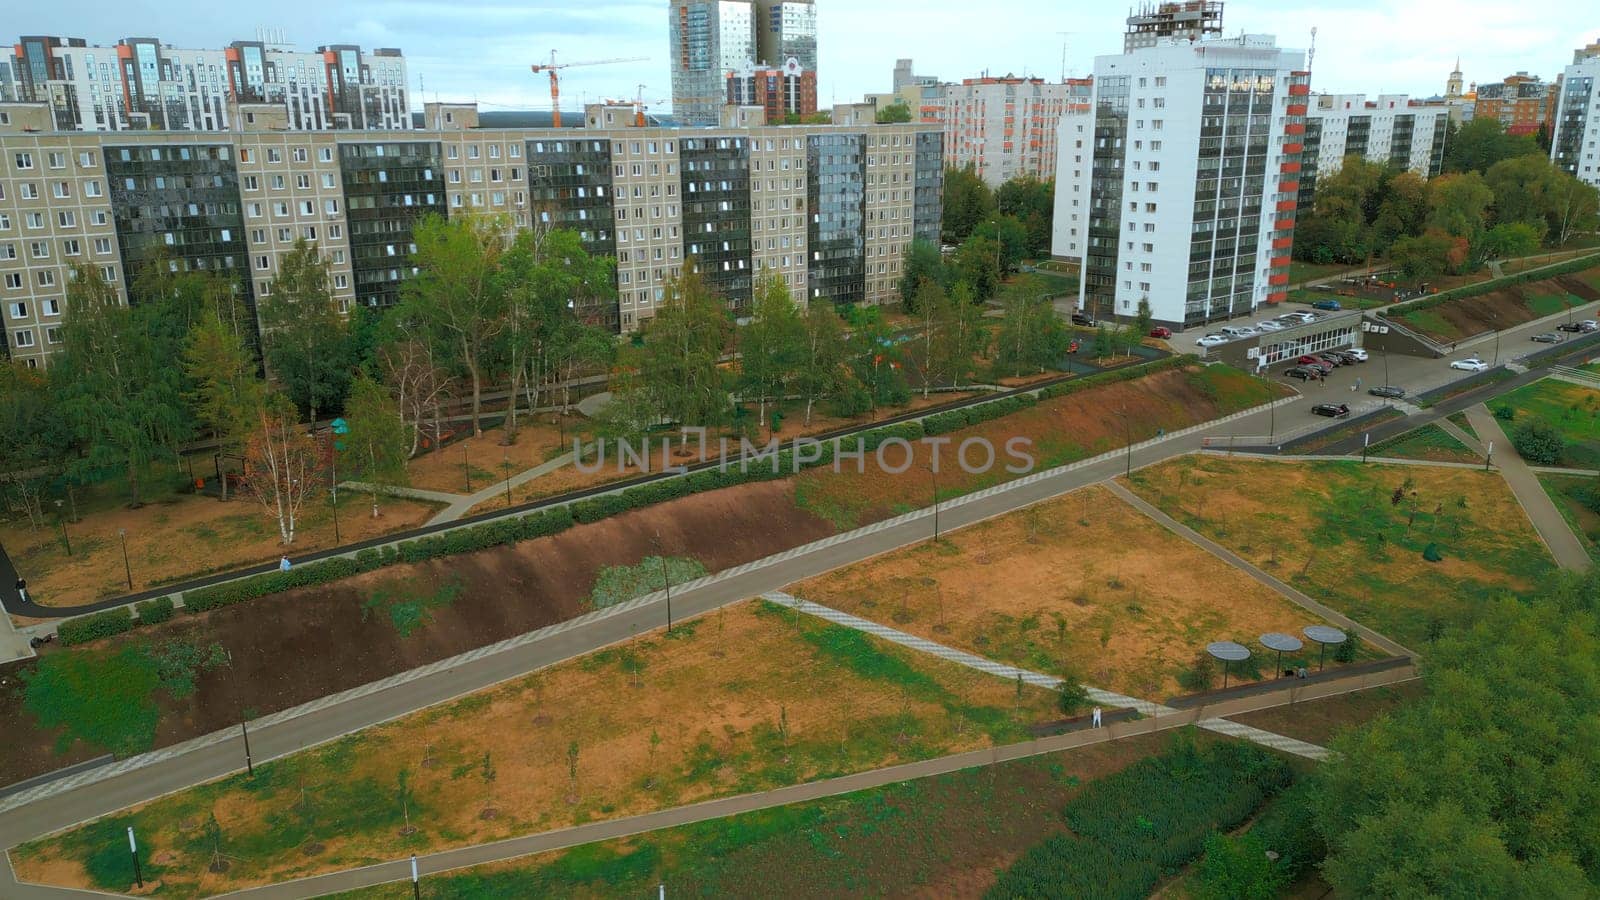 Top view of park alley in residential area of city. Clip. View of city with residential buildings and park alley. Beautiful landscape of park alley in urban landscape with buildings.